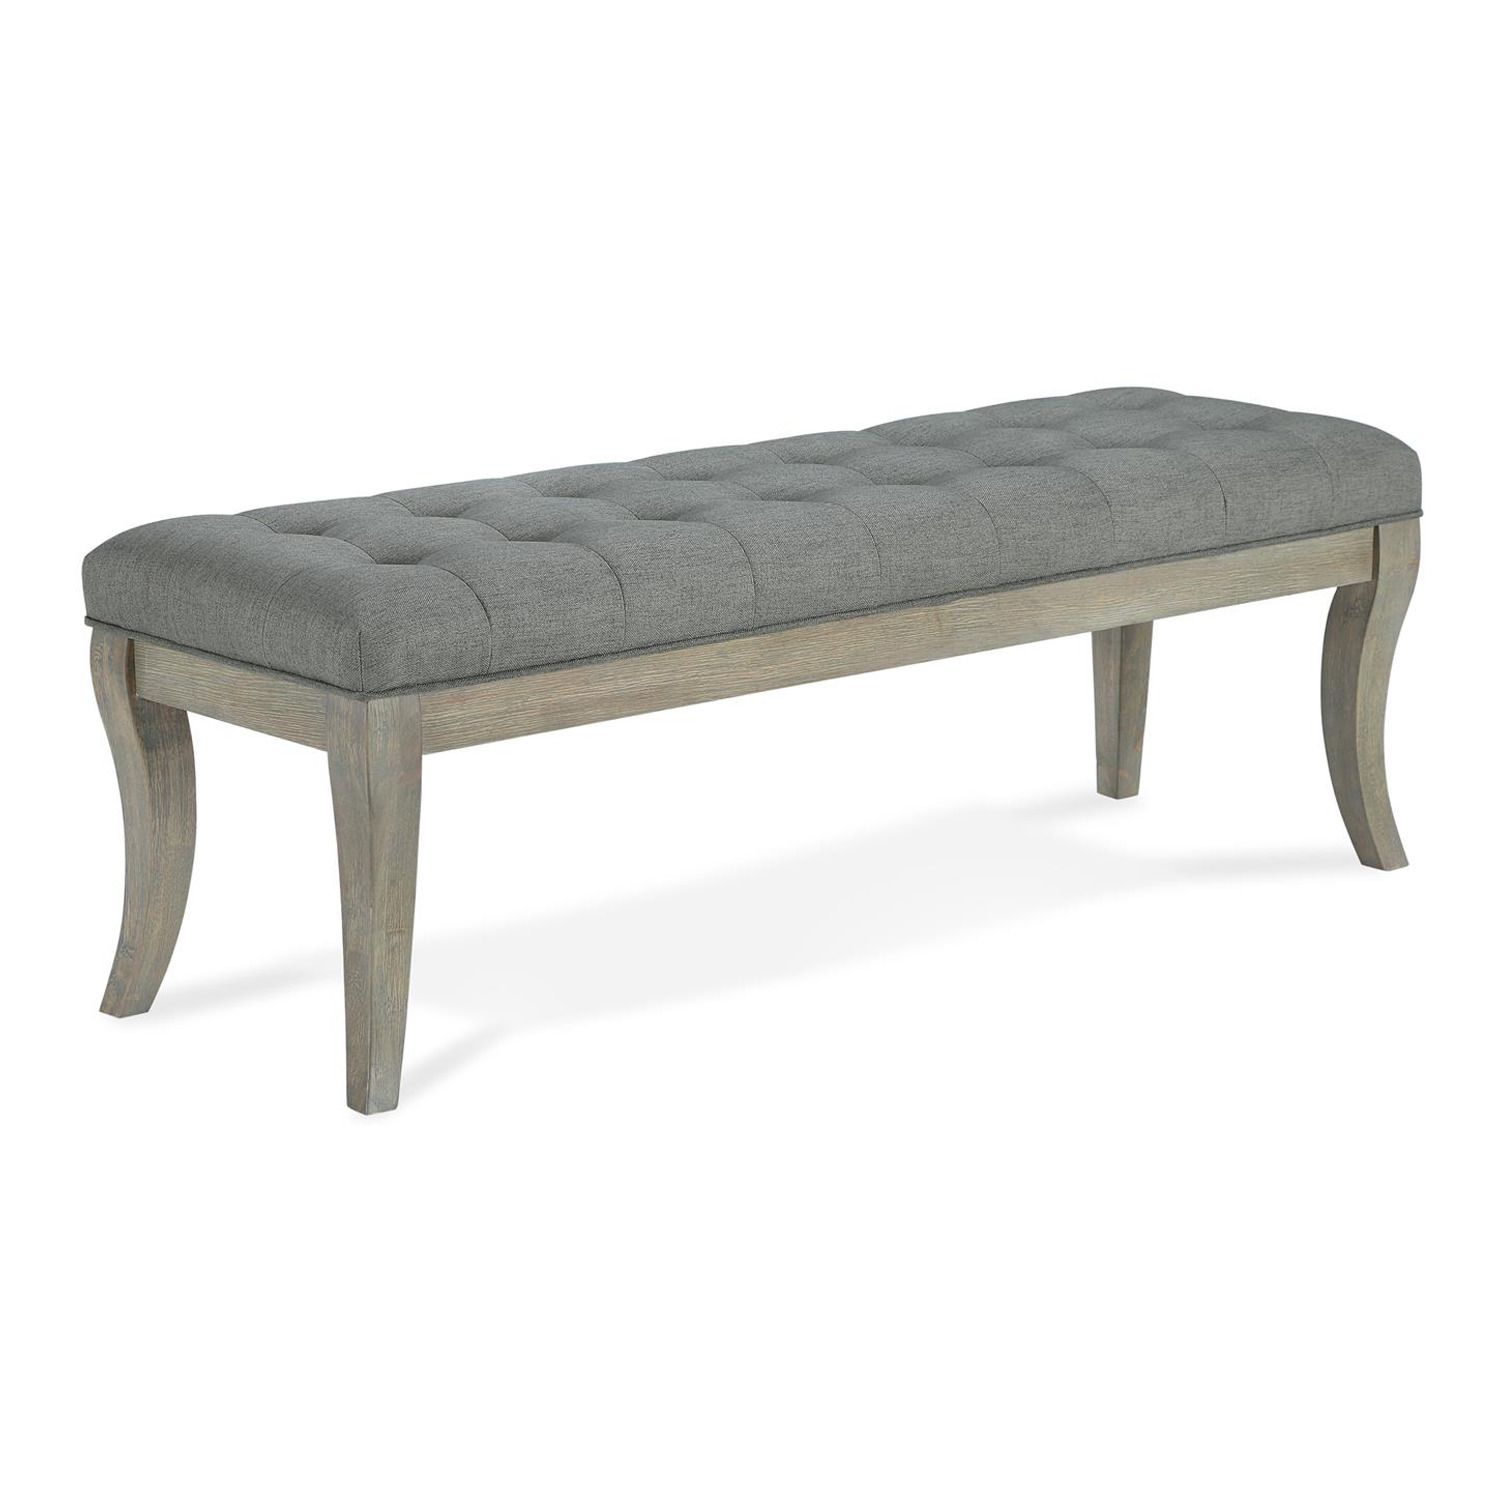 Image for Dorel Living Theodore Rectangular Tufted Bench at Kohl's.